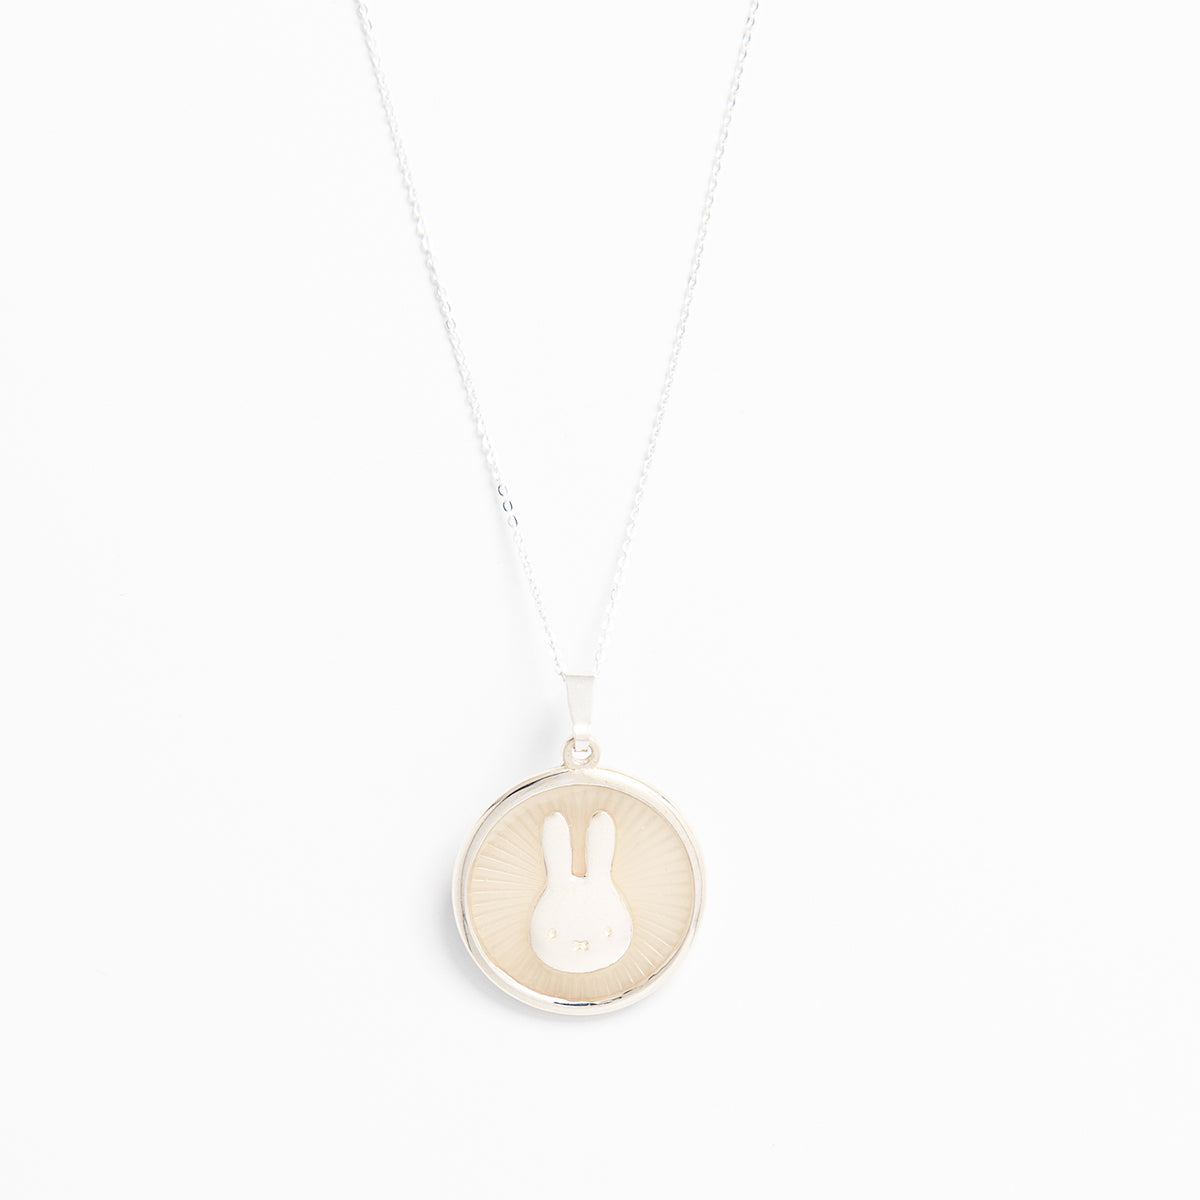 Miffy Enamel Necklace in white